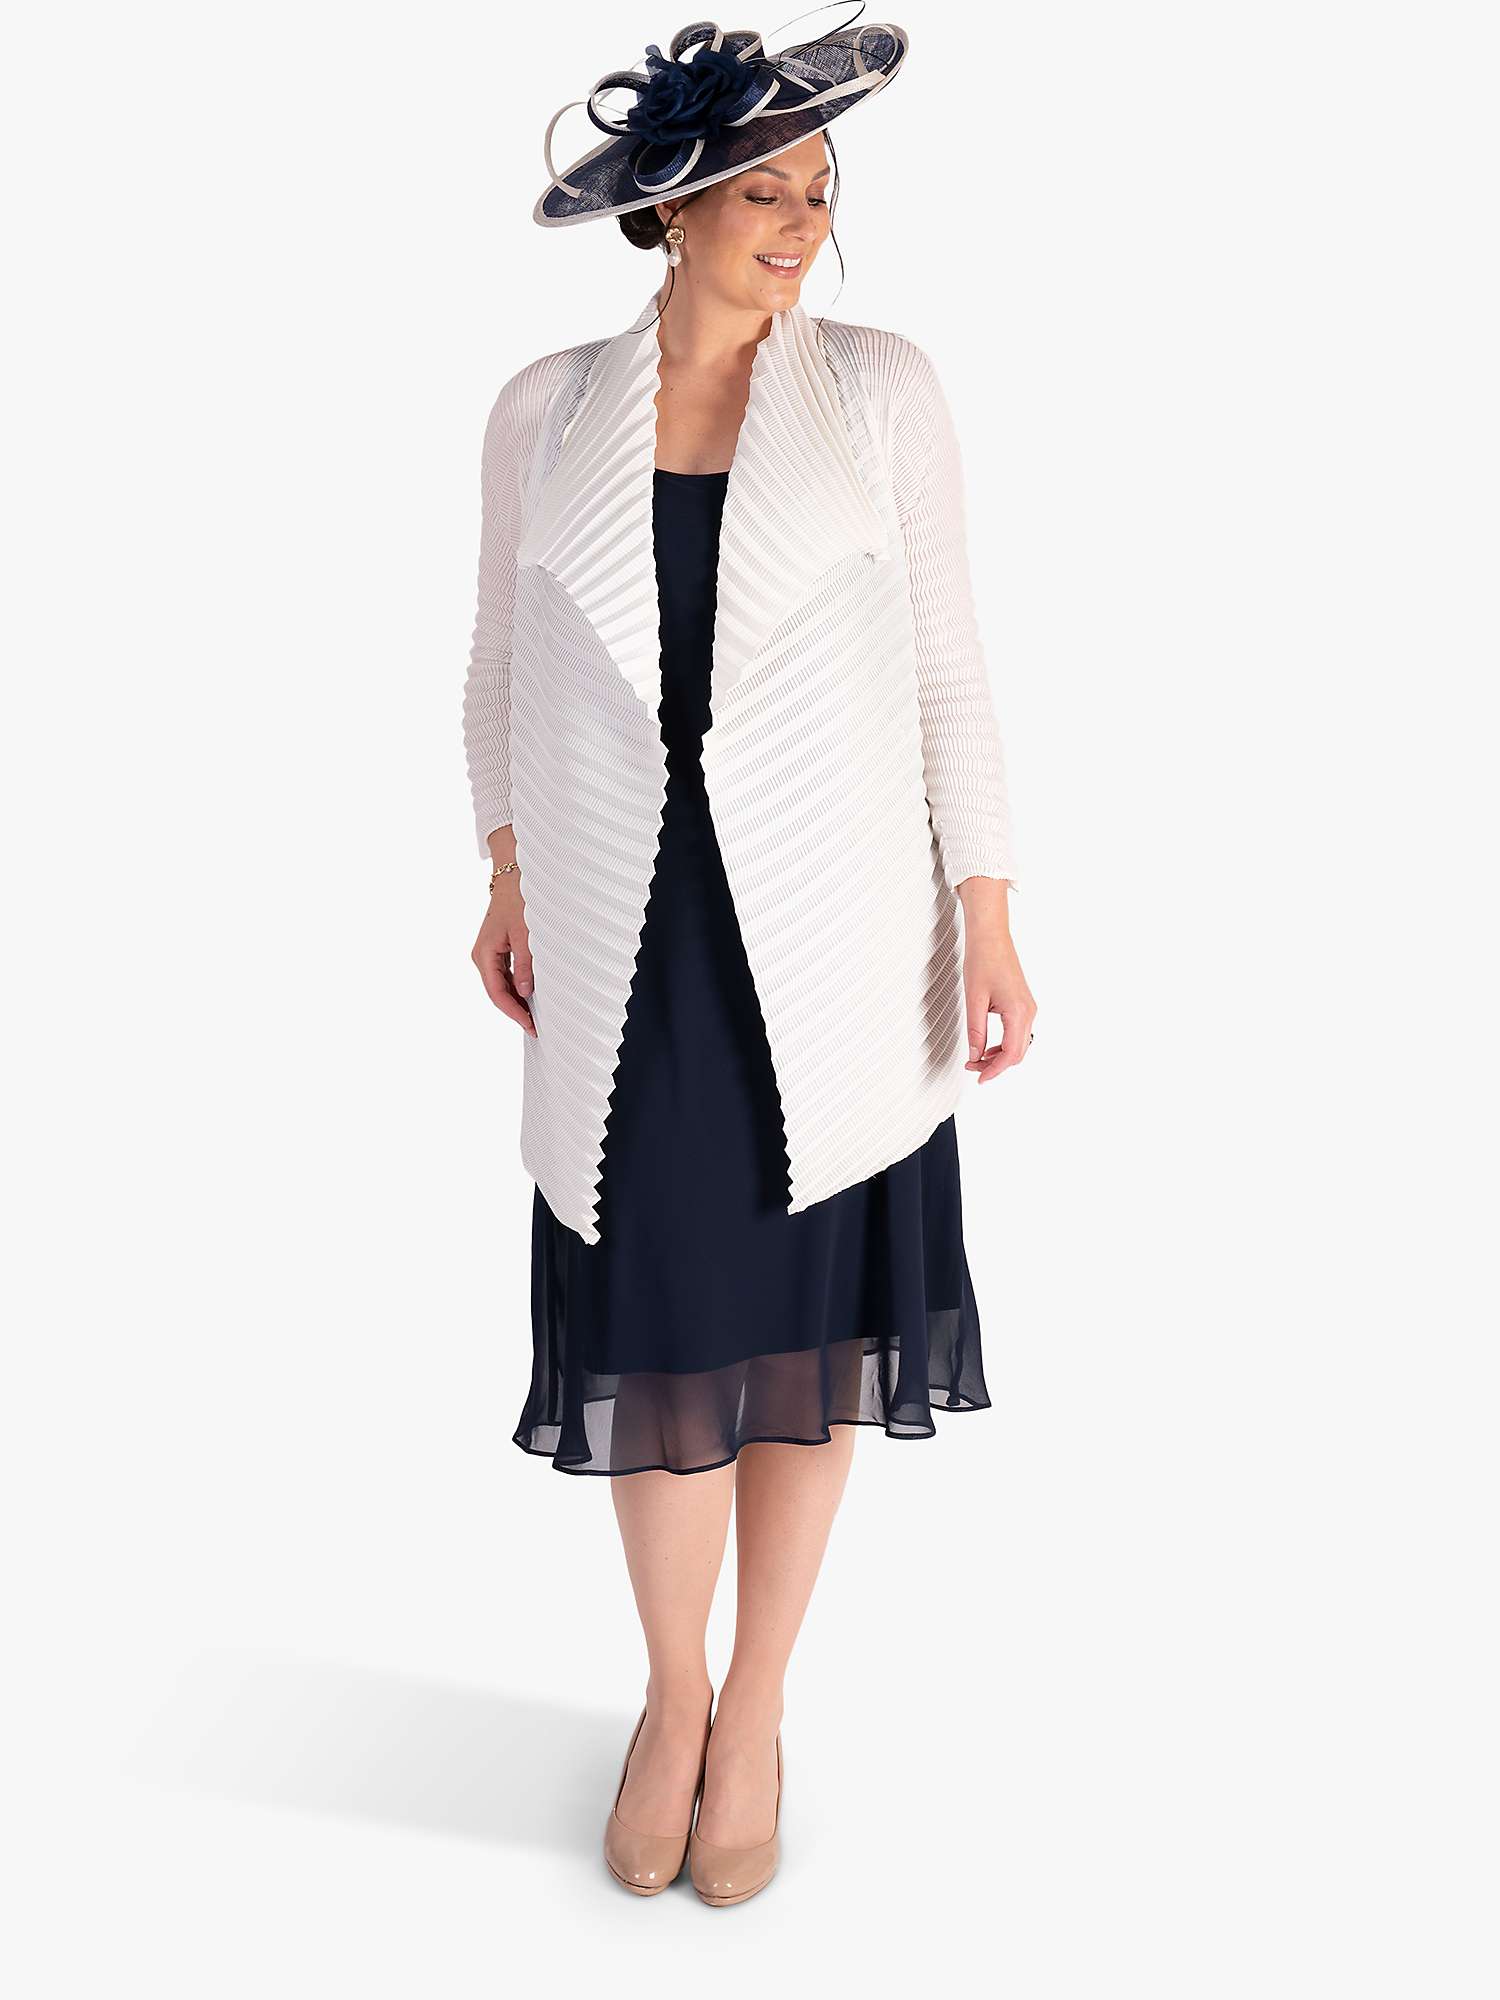 Buy chesca Concertina Pleated Jacket Online at johnlewis.com